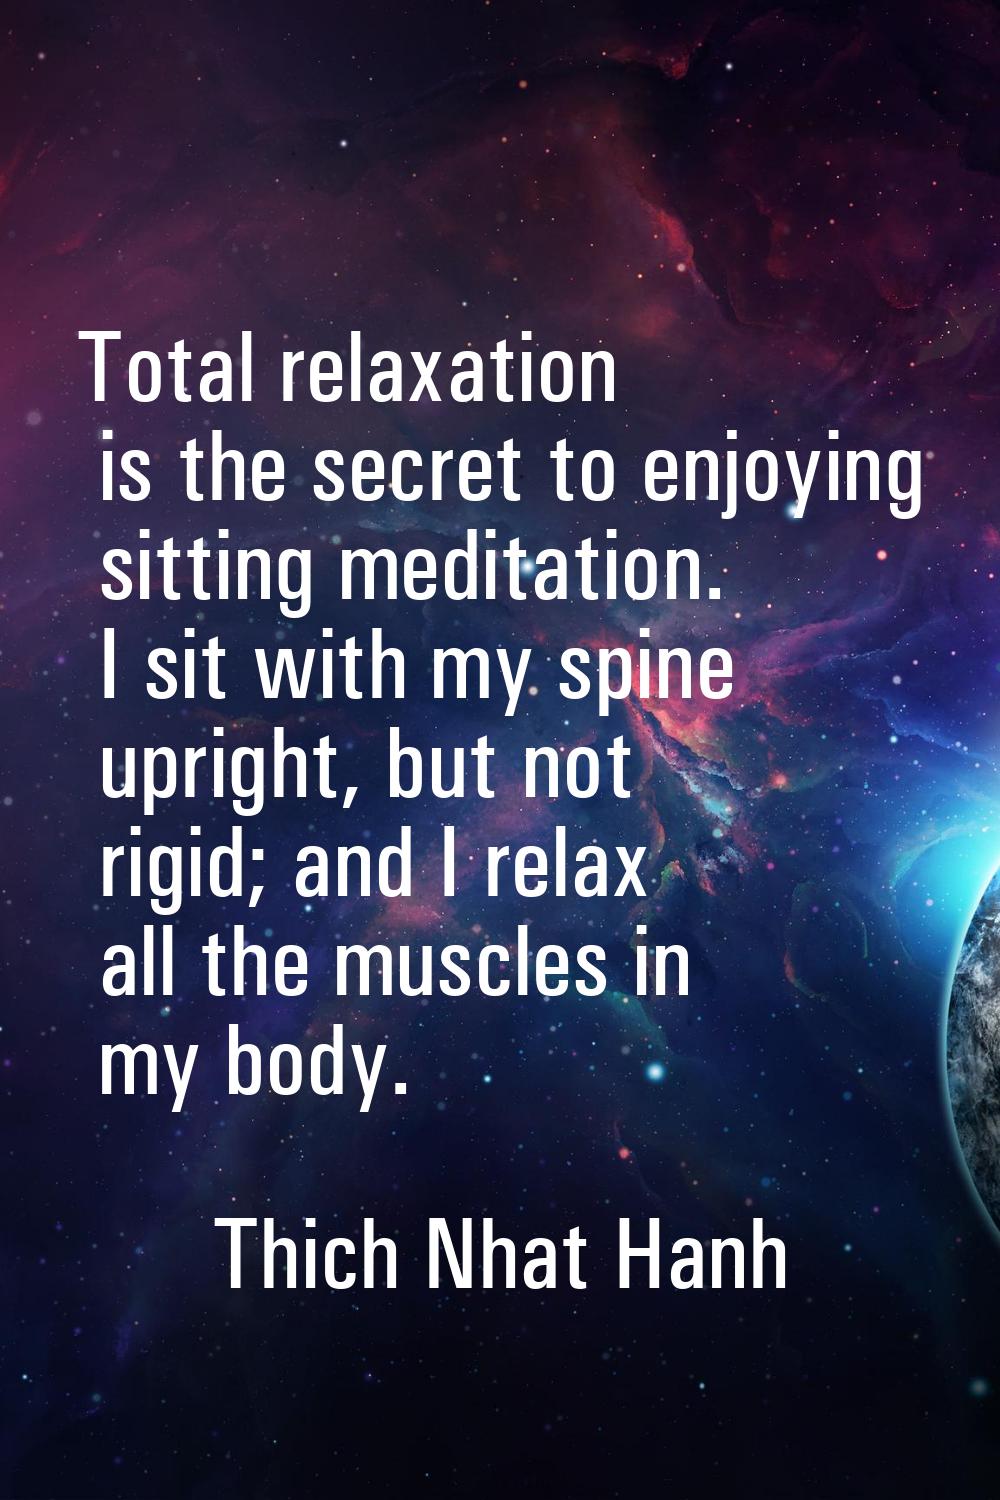 Total relaxation is the secret to enjoying sitting meditation. I sit with my spine upright, but not